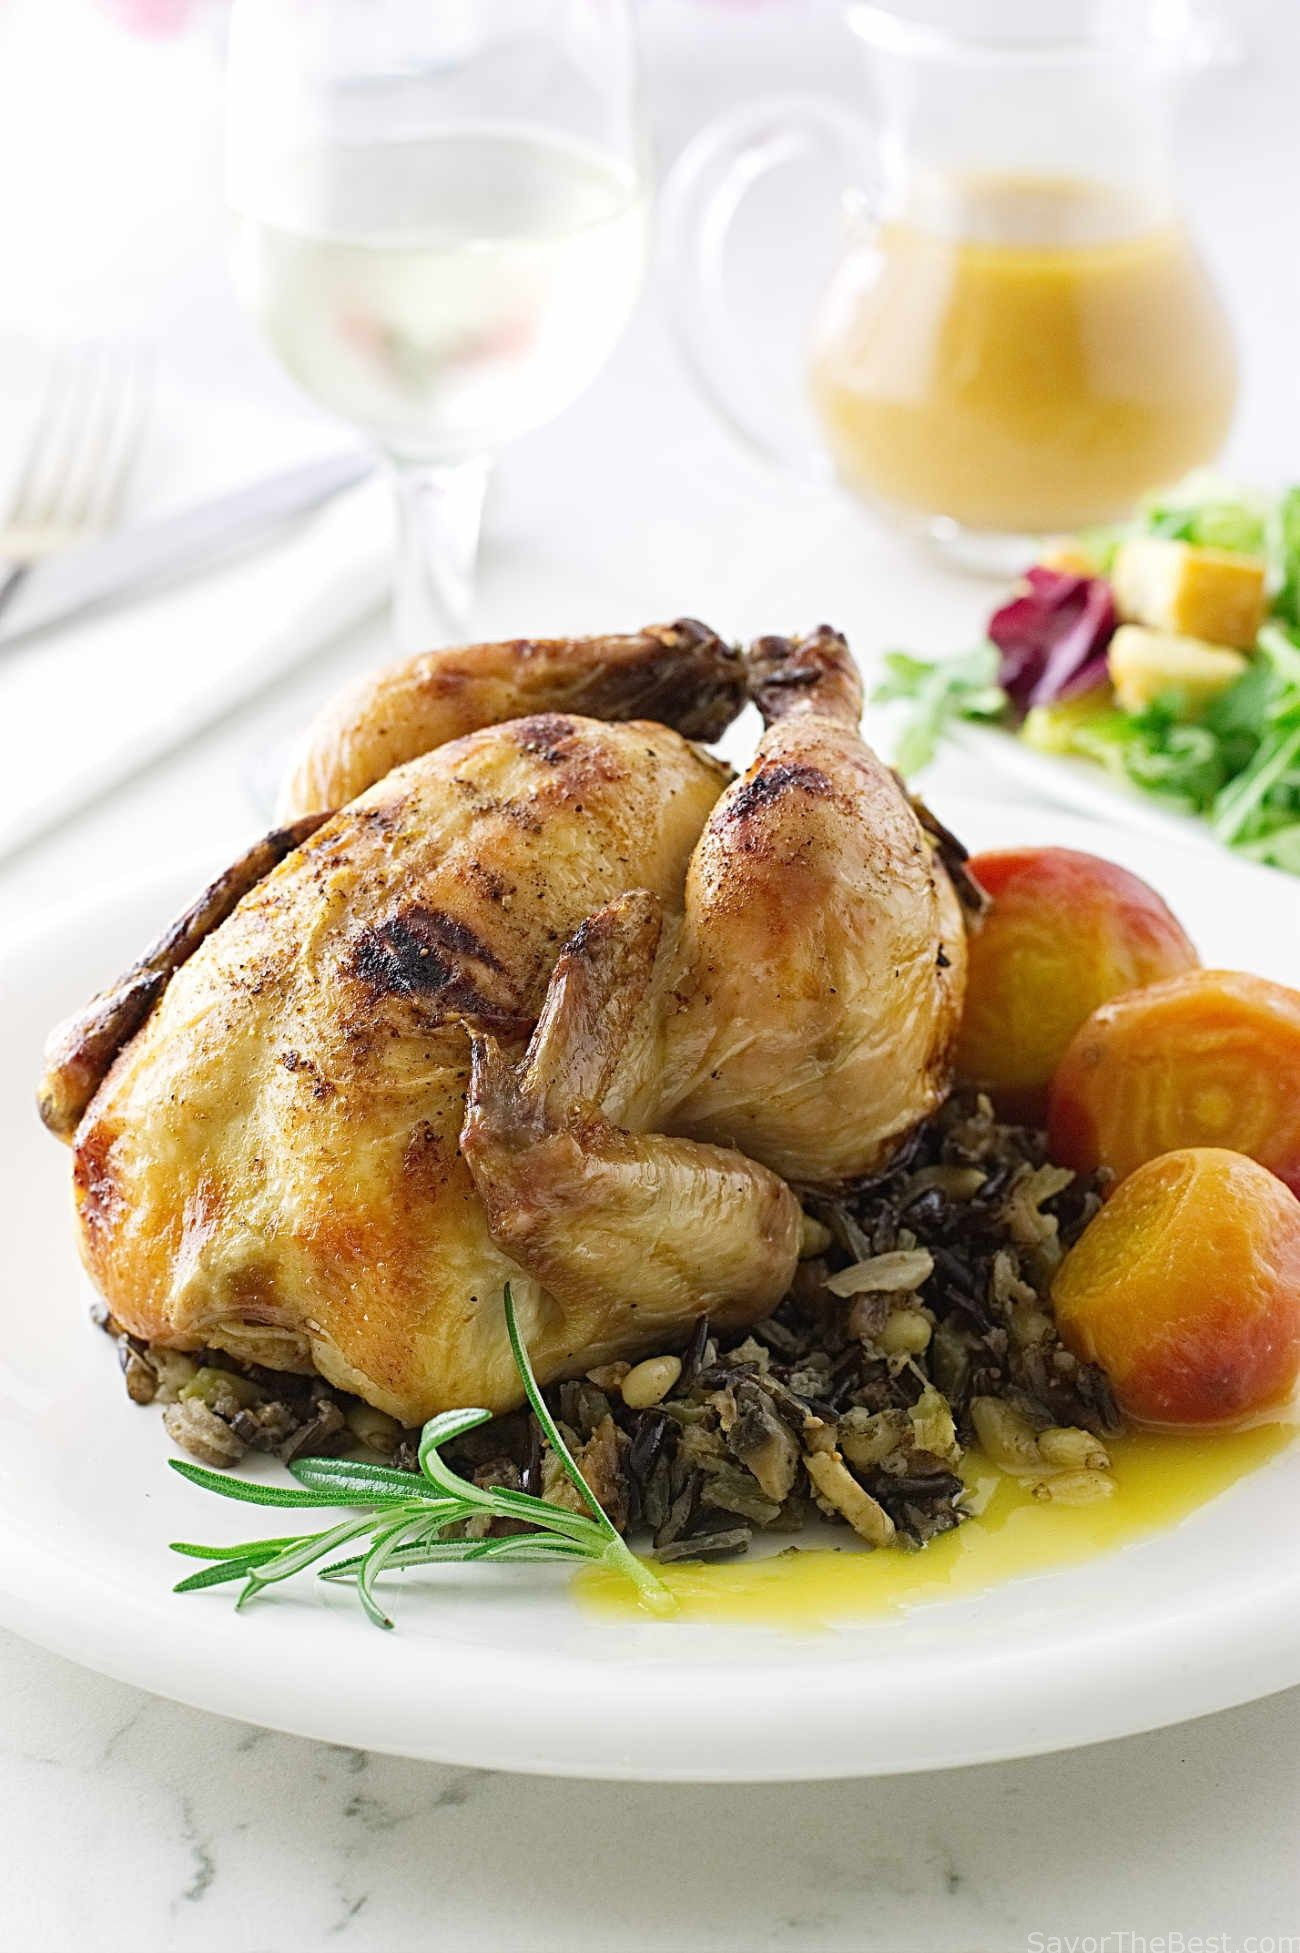 Cornish Game Hens Recipe Food Network
 Roasted Cornish Game Hens & Wild Rice Fig Stuffing